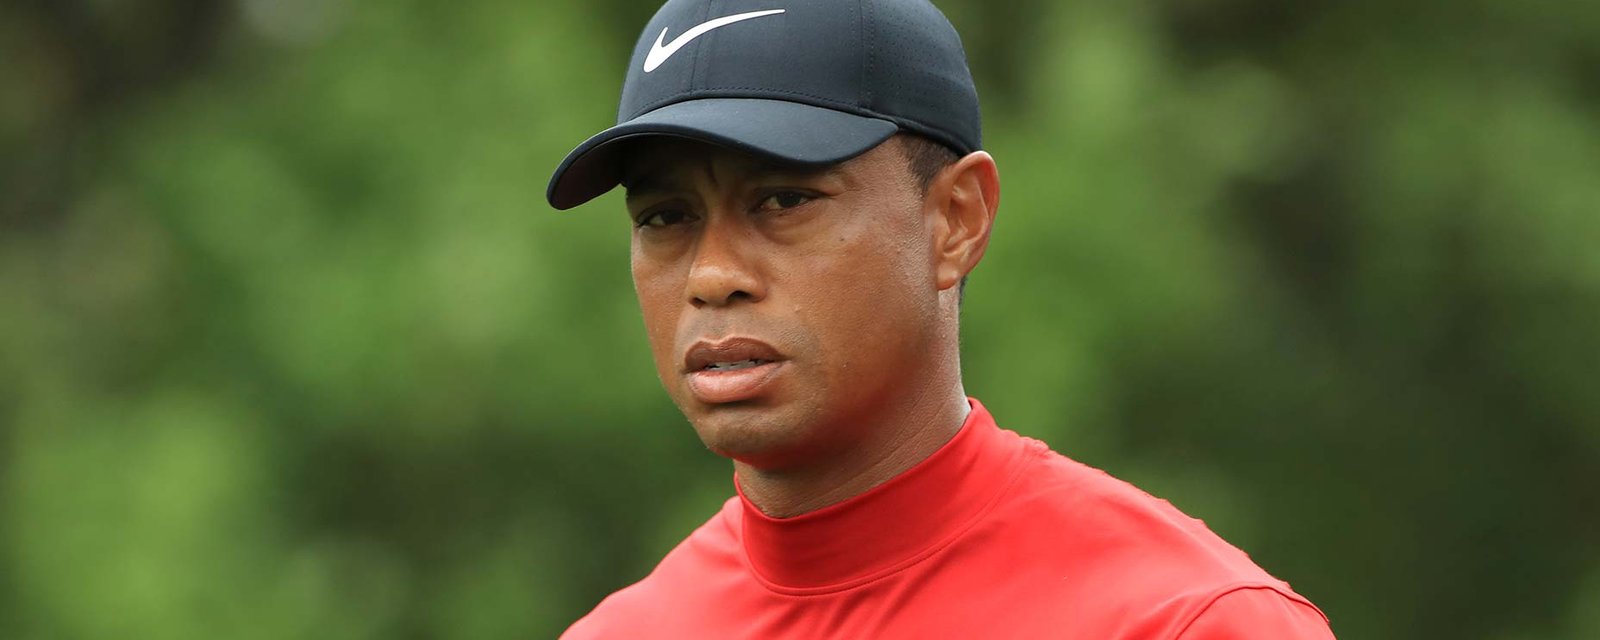 Tiger Woods involved in serious car accident; had to be extricated from the wreck with the ‘jaws of life’